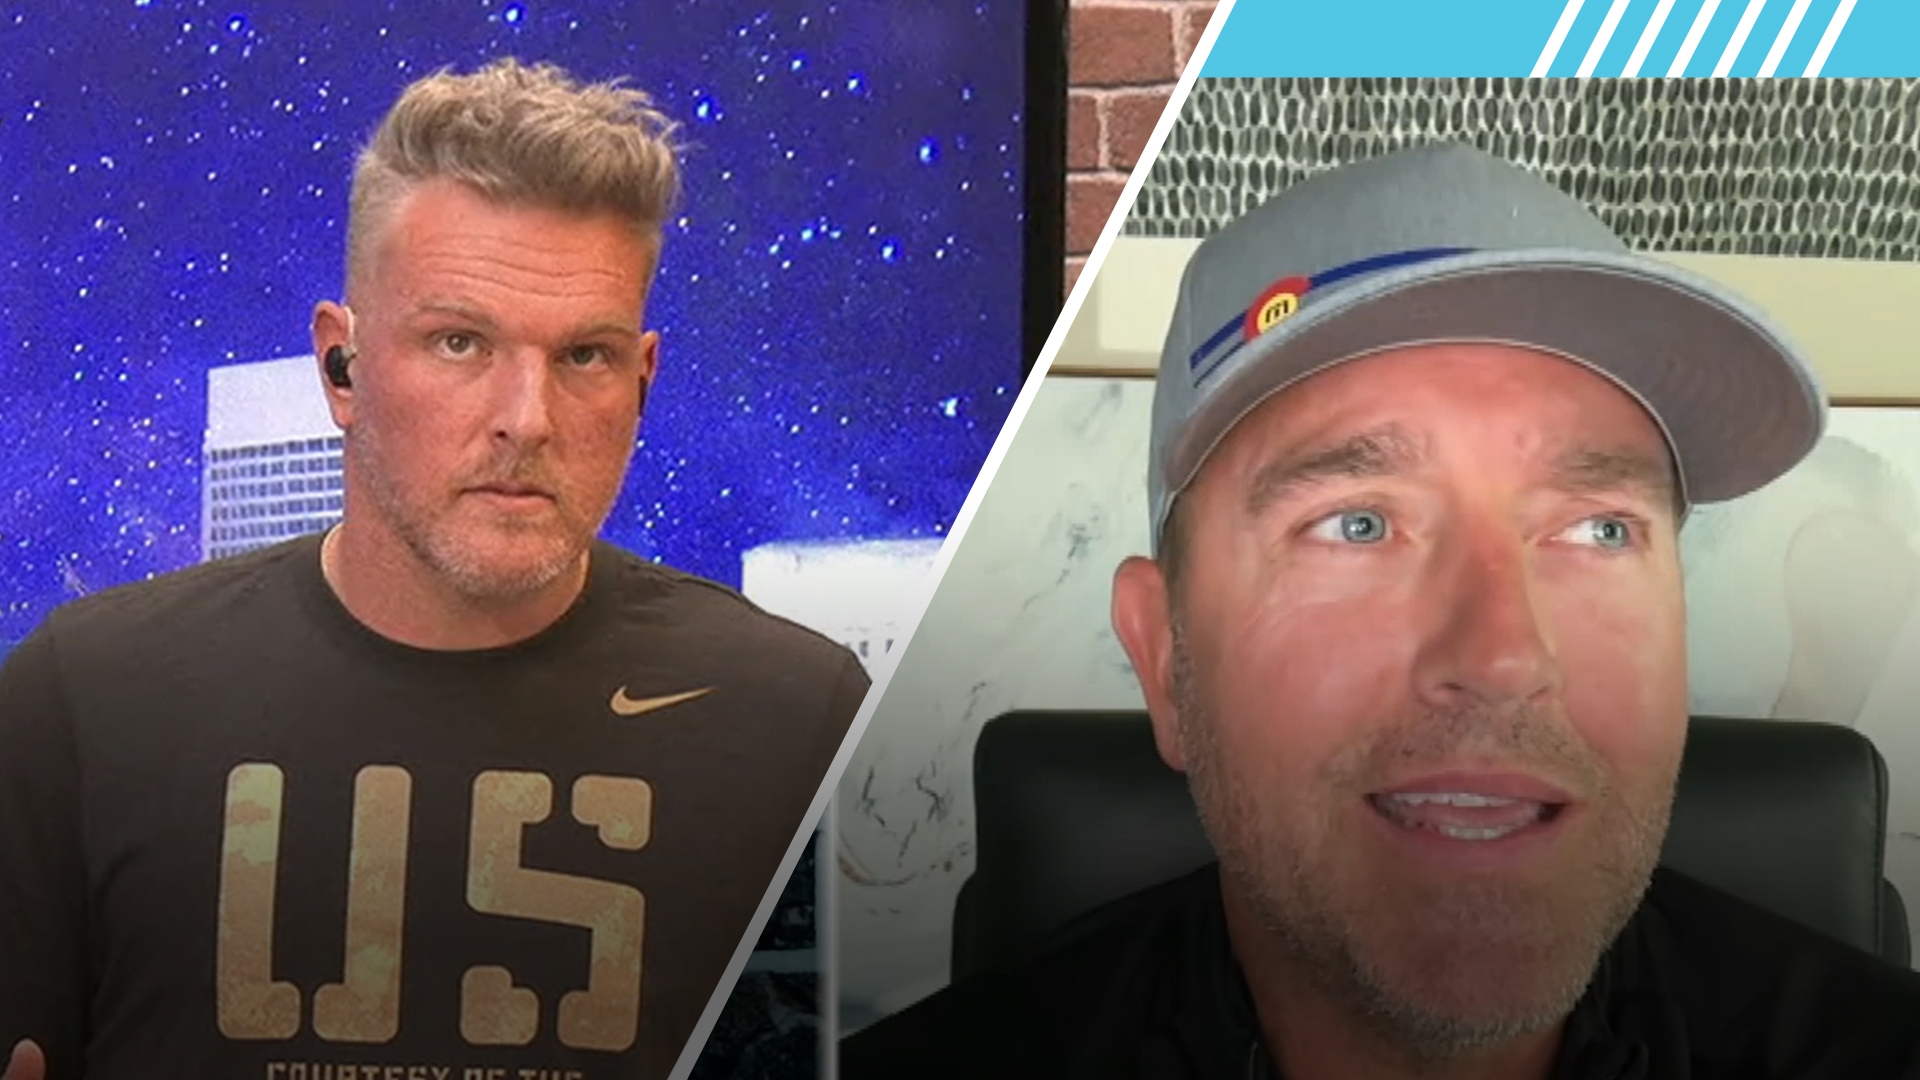 Herbstreit to McAfee: I'm excited to see what happens with Bears